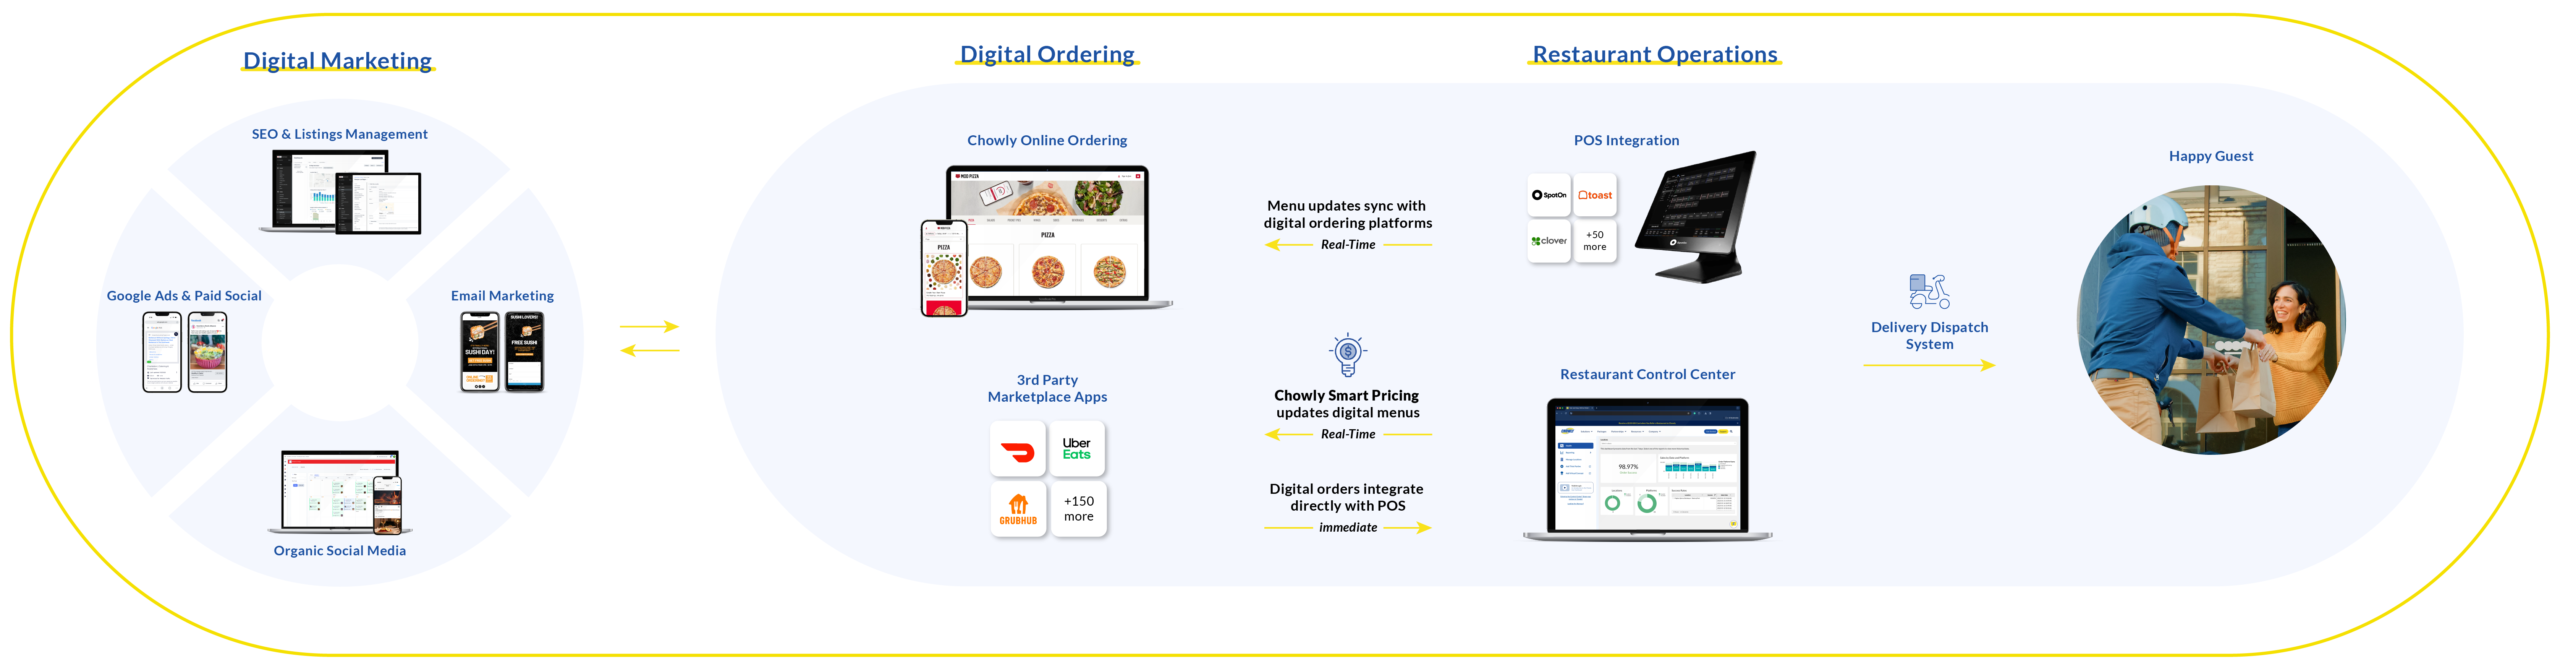 All In One Digital Ordering Platform - Graphic